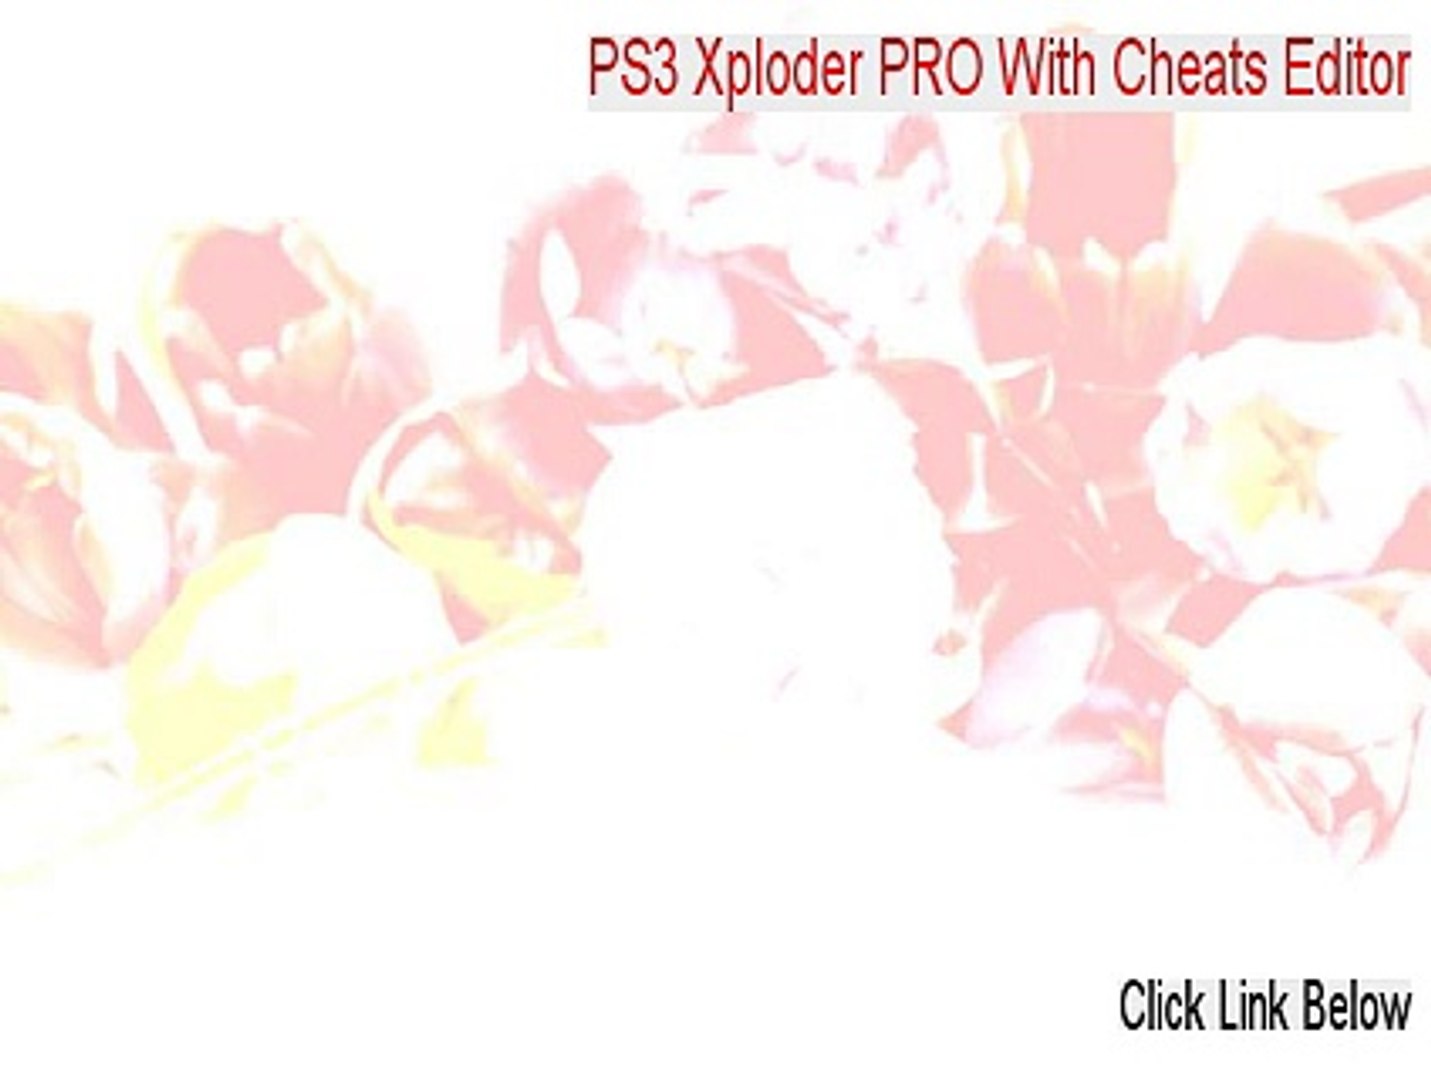 PS3 Xploder PRO With Cheats Editor Full Download - Legit Download 2015 -  video Dailymotion